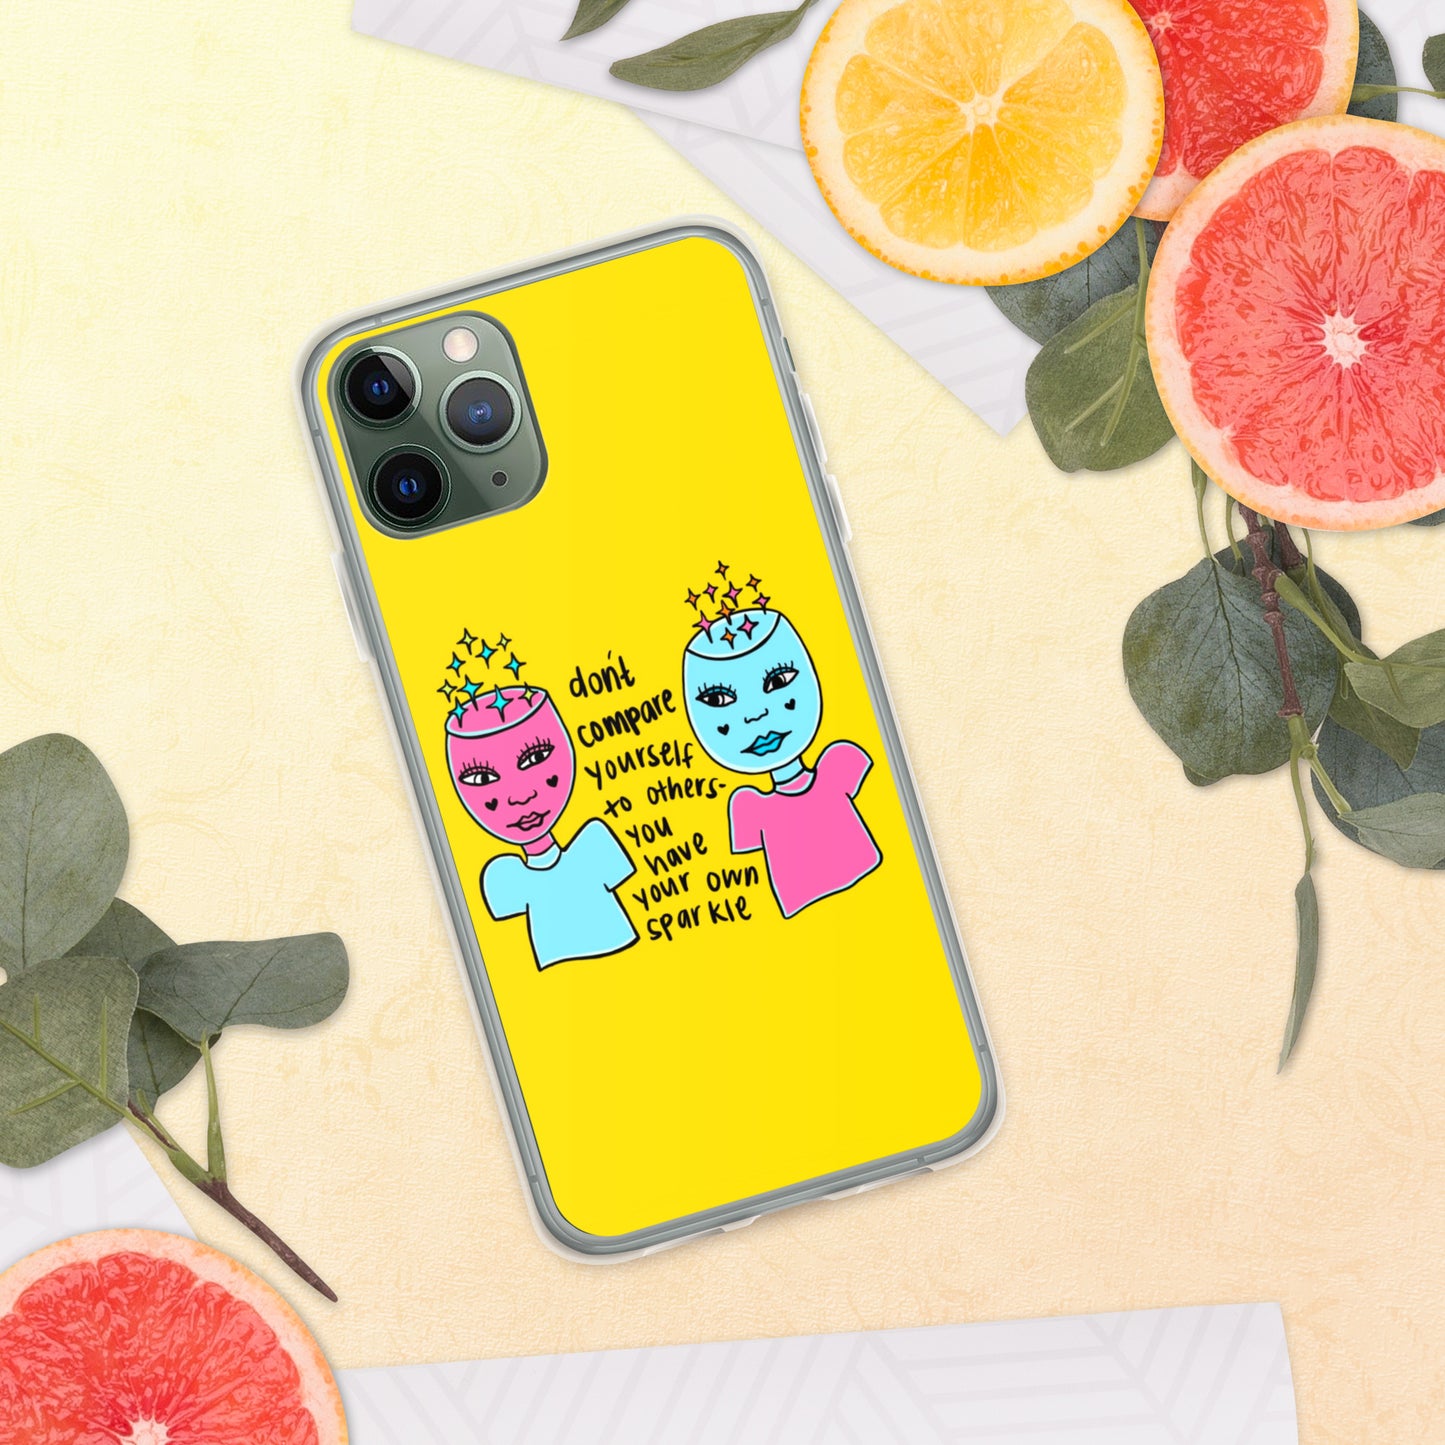 your own sparkle iPhone case